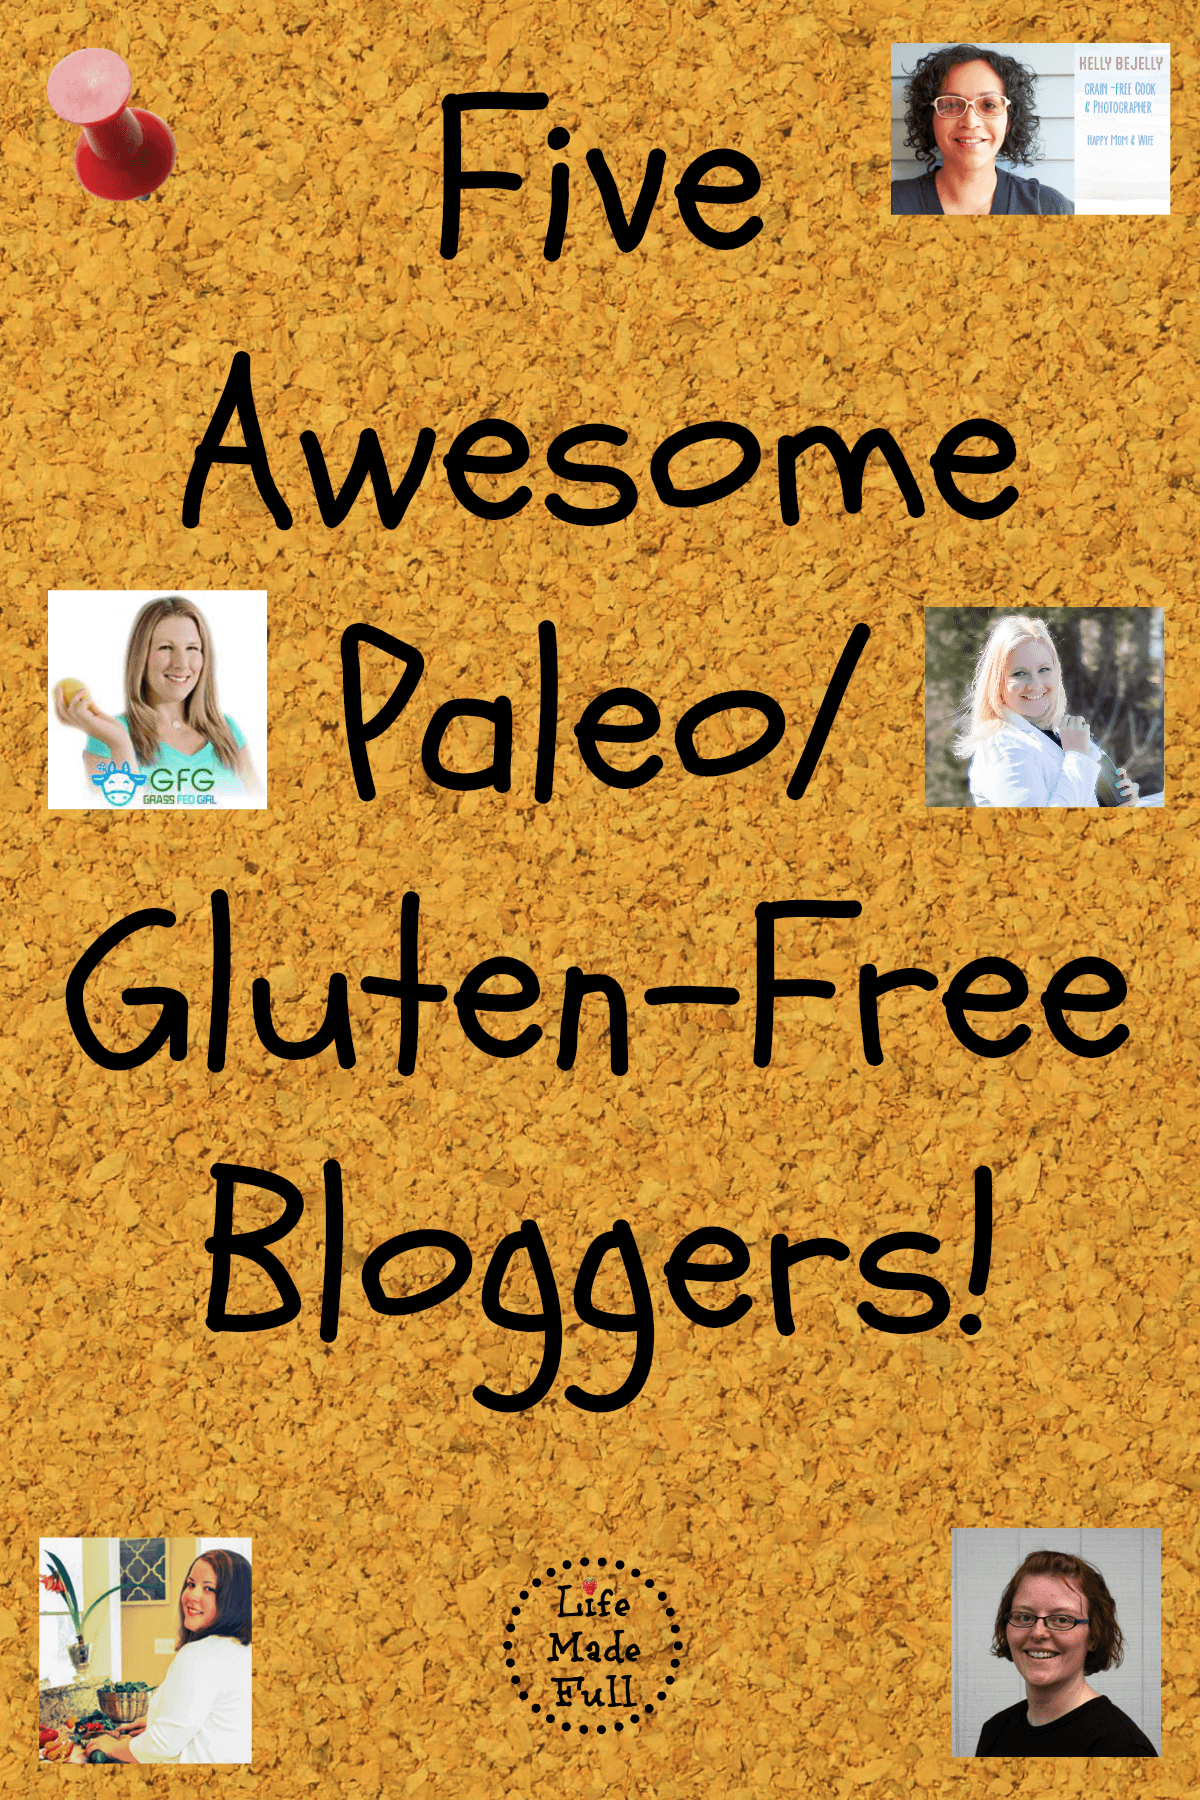 5 Awesome Paleo/Gluten Free Bloggers!